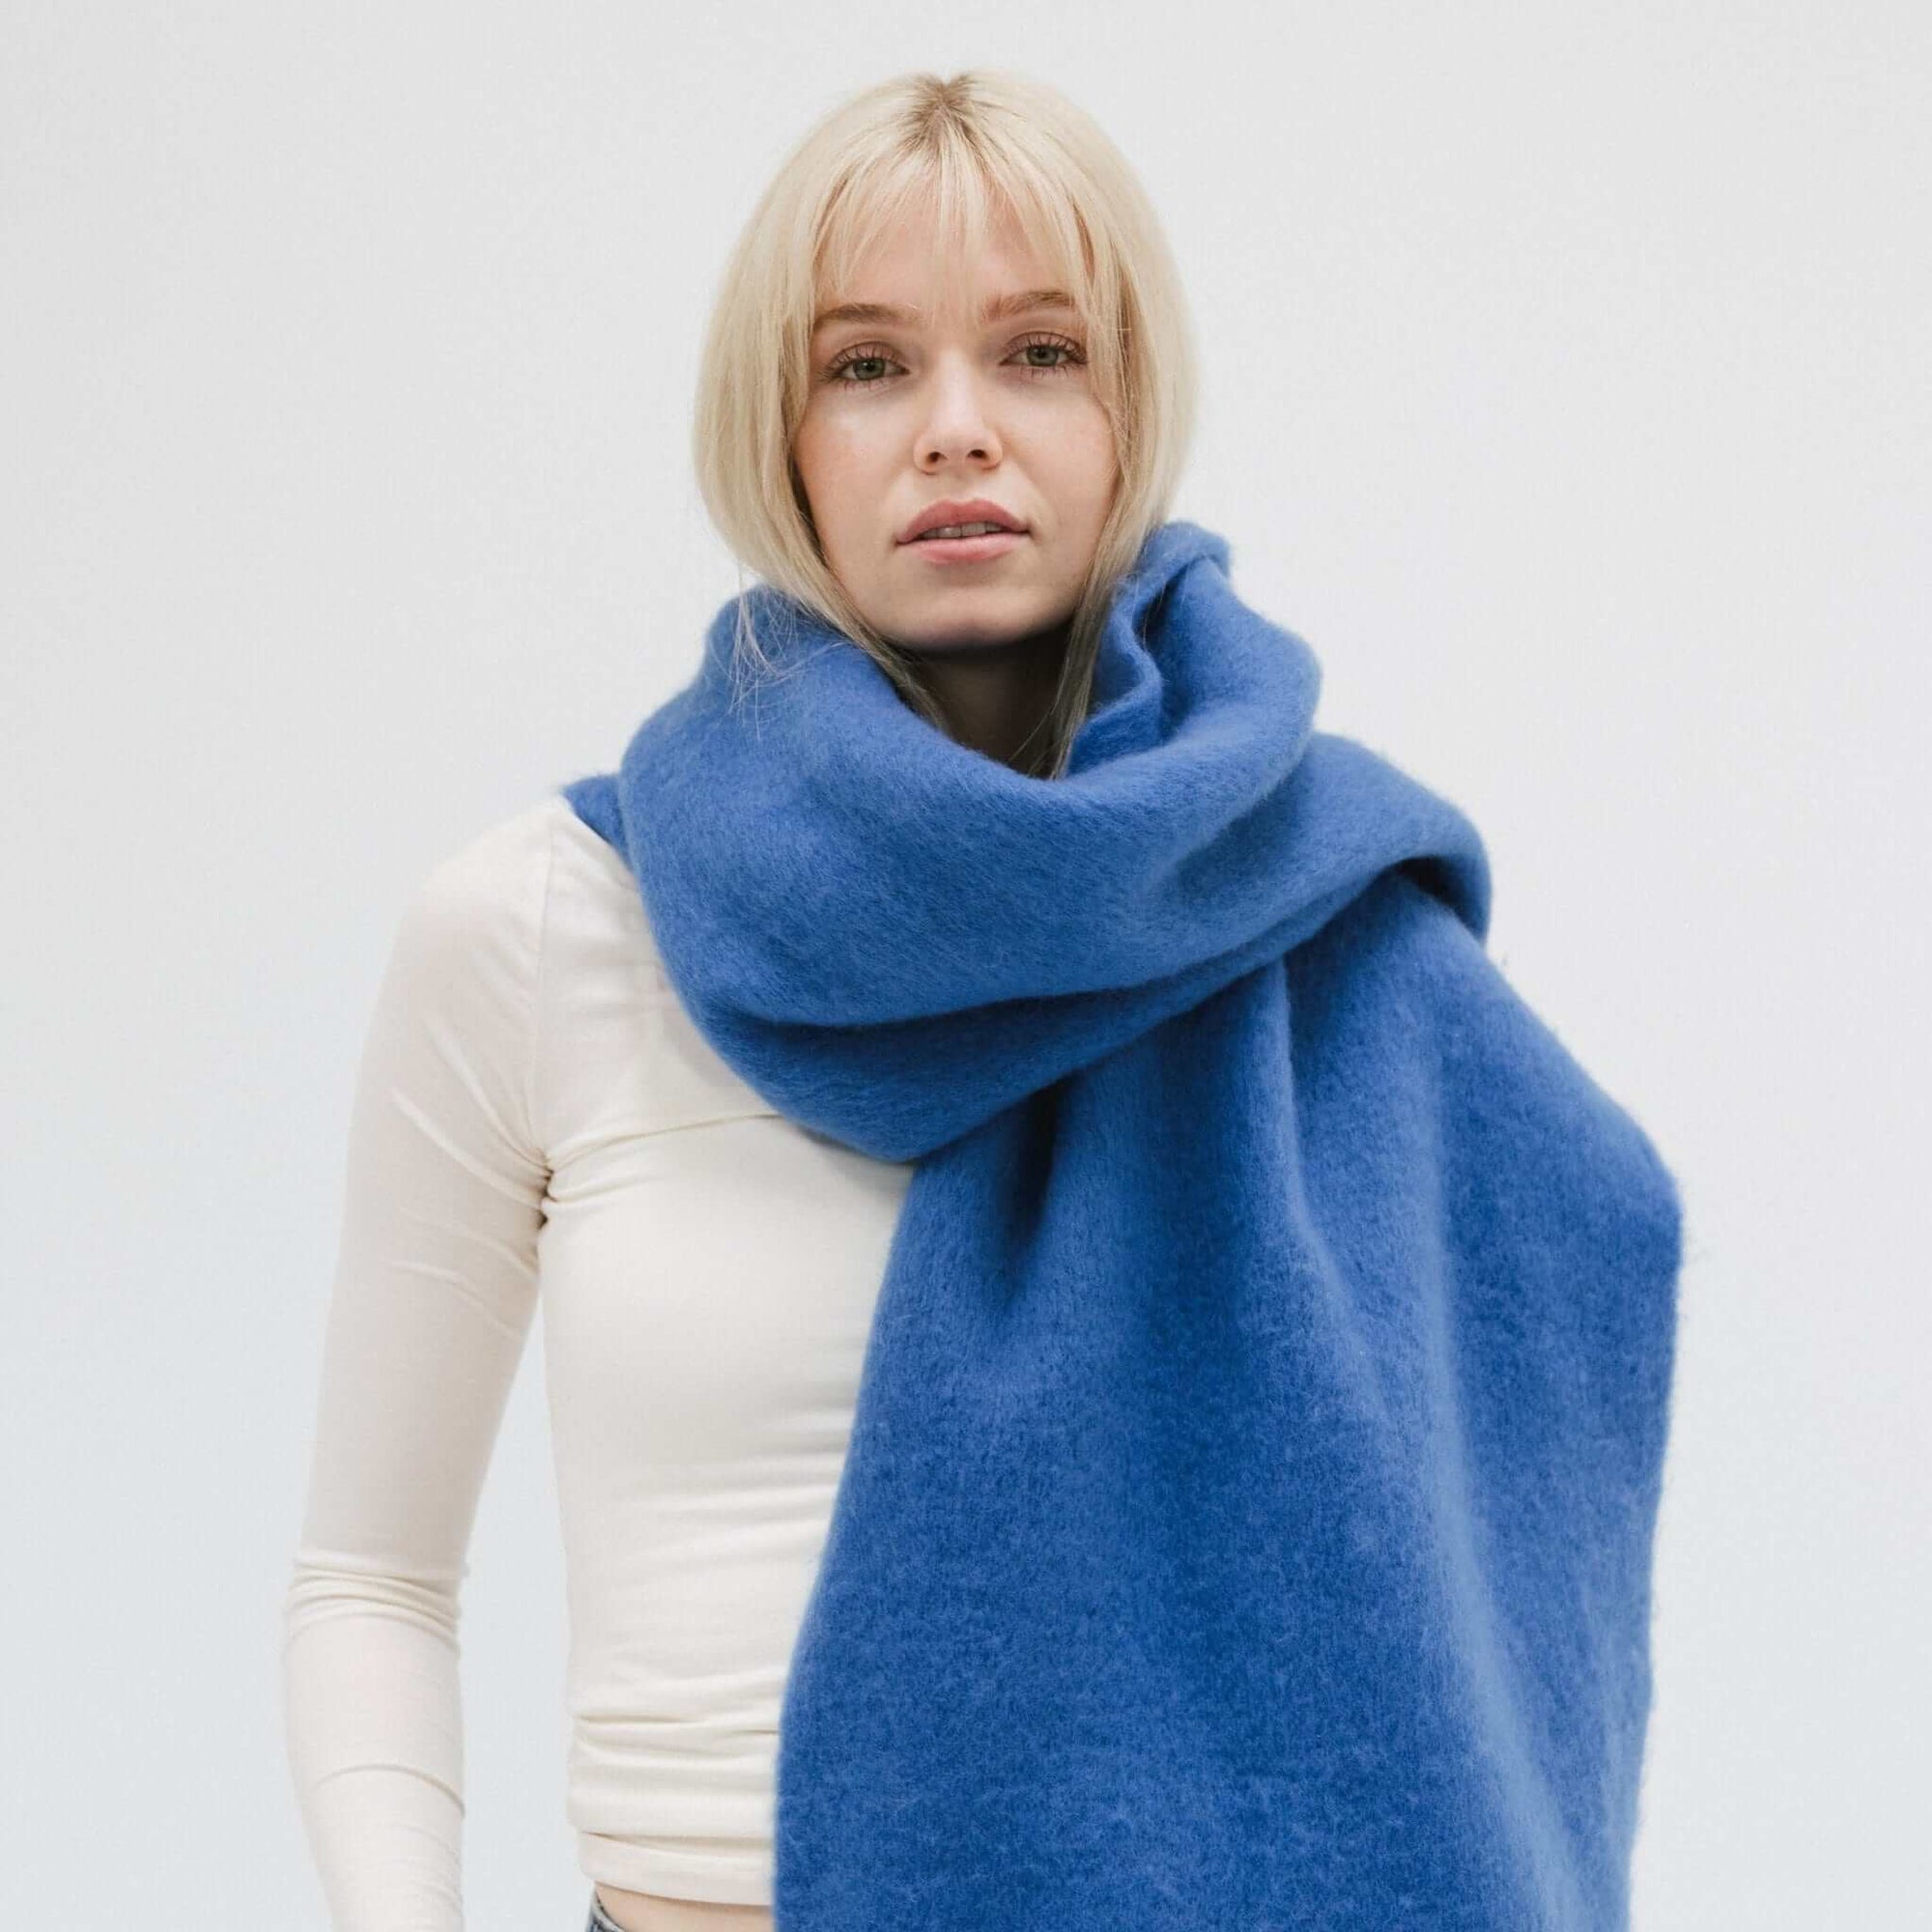 Gigi Pip winter accessories for women - Mik Oversized Scarf - 100% acrylic oversized blanket scarf featuring a retro limited edition holiday logo [alpine-blue]